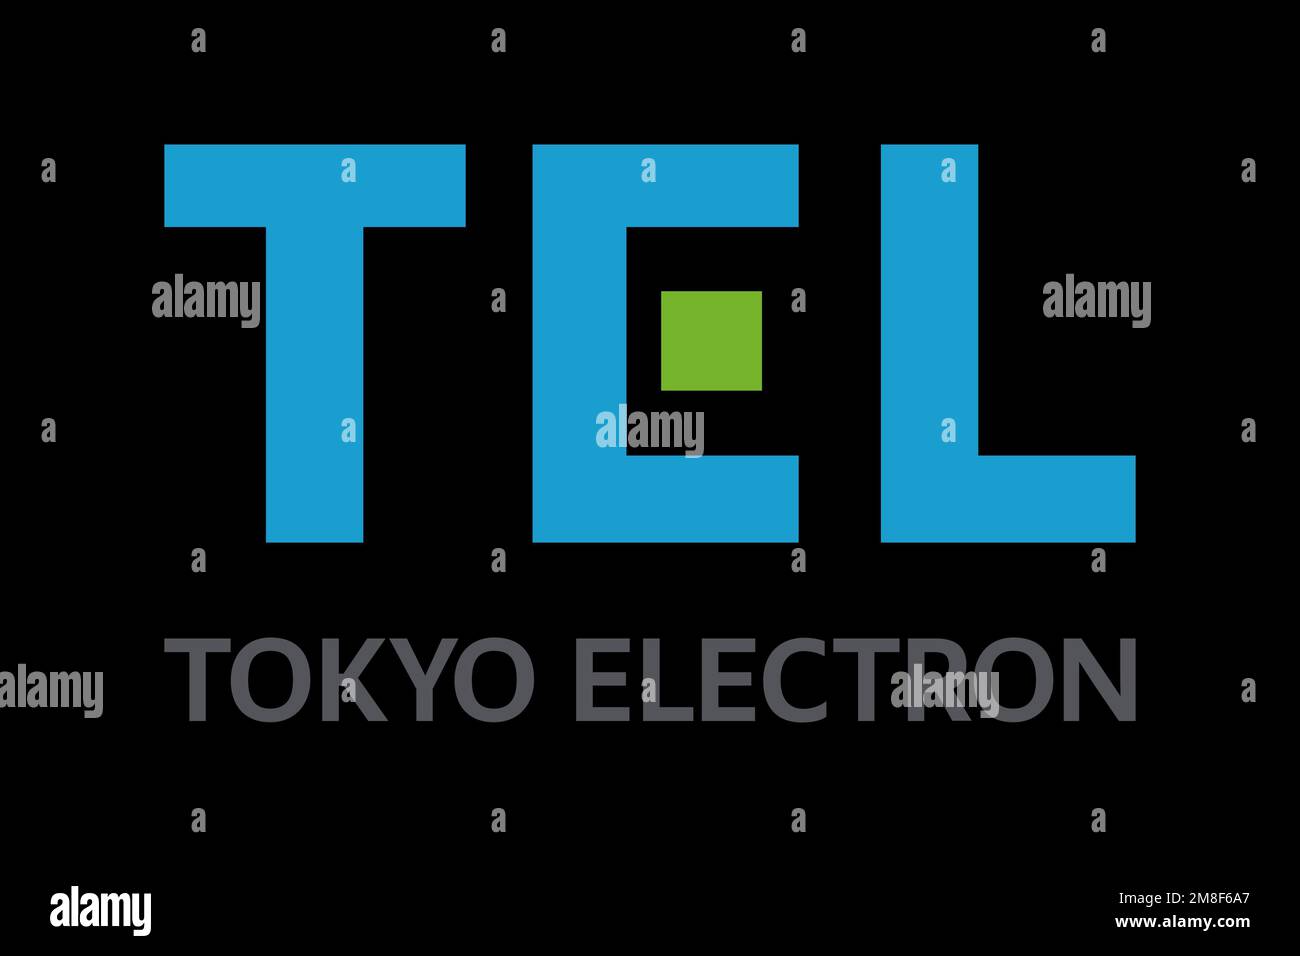 Tokyo Electron to sell US HQ property in Austin - Austin Business Journal